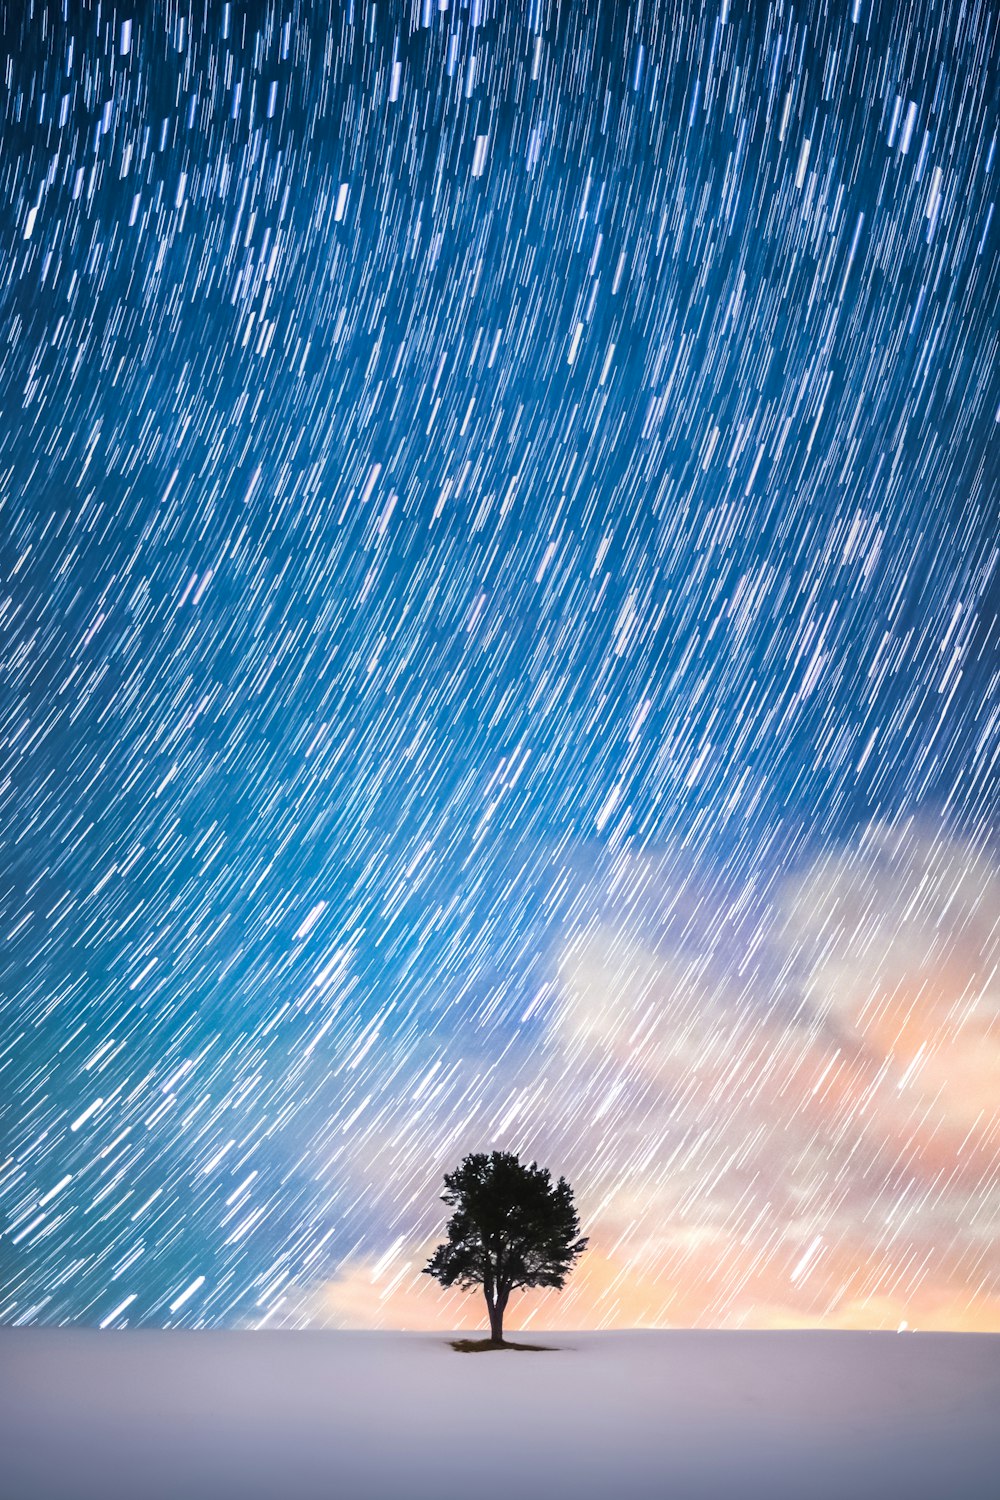 a lone tree in the middle of a field under a star filled sky